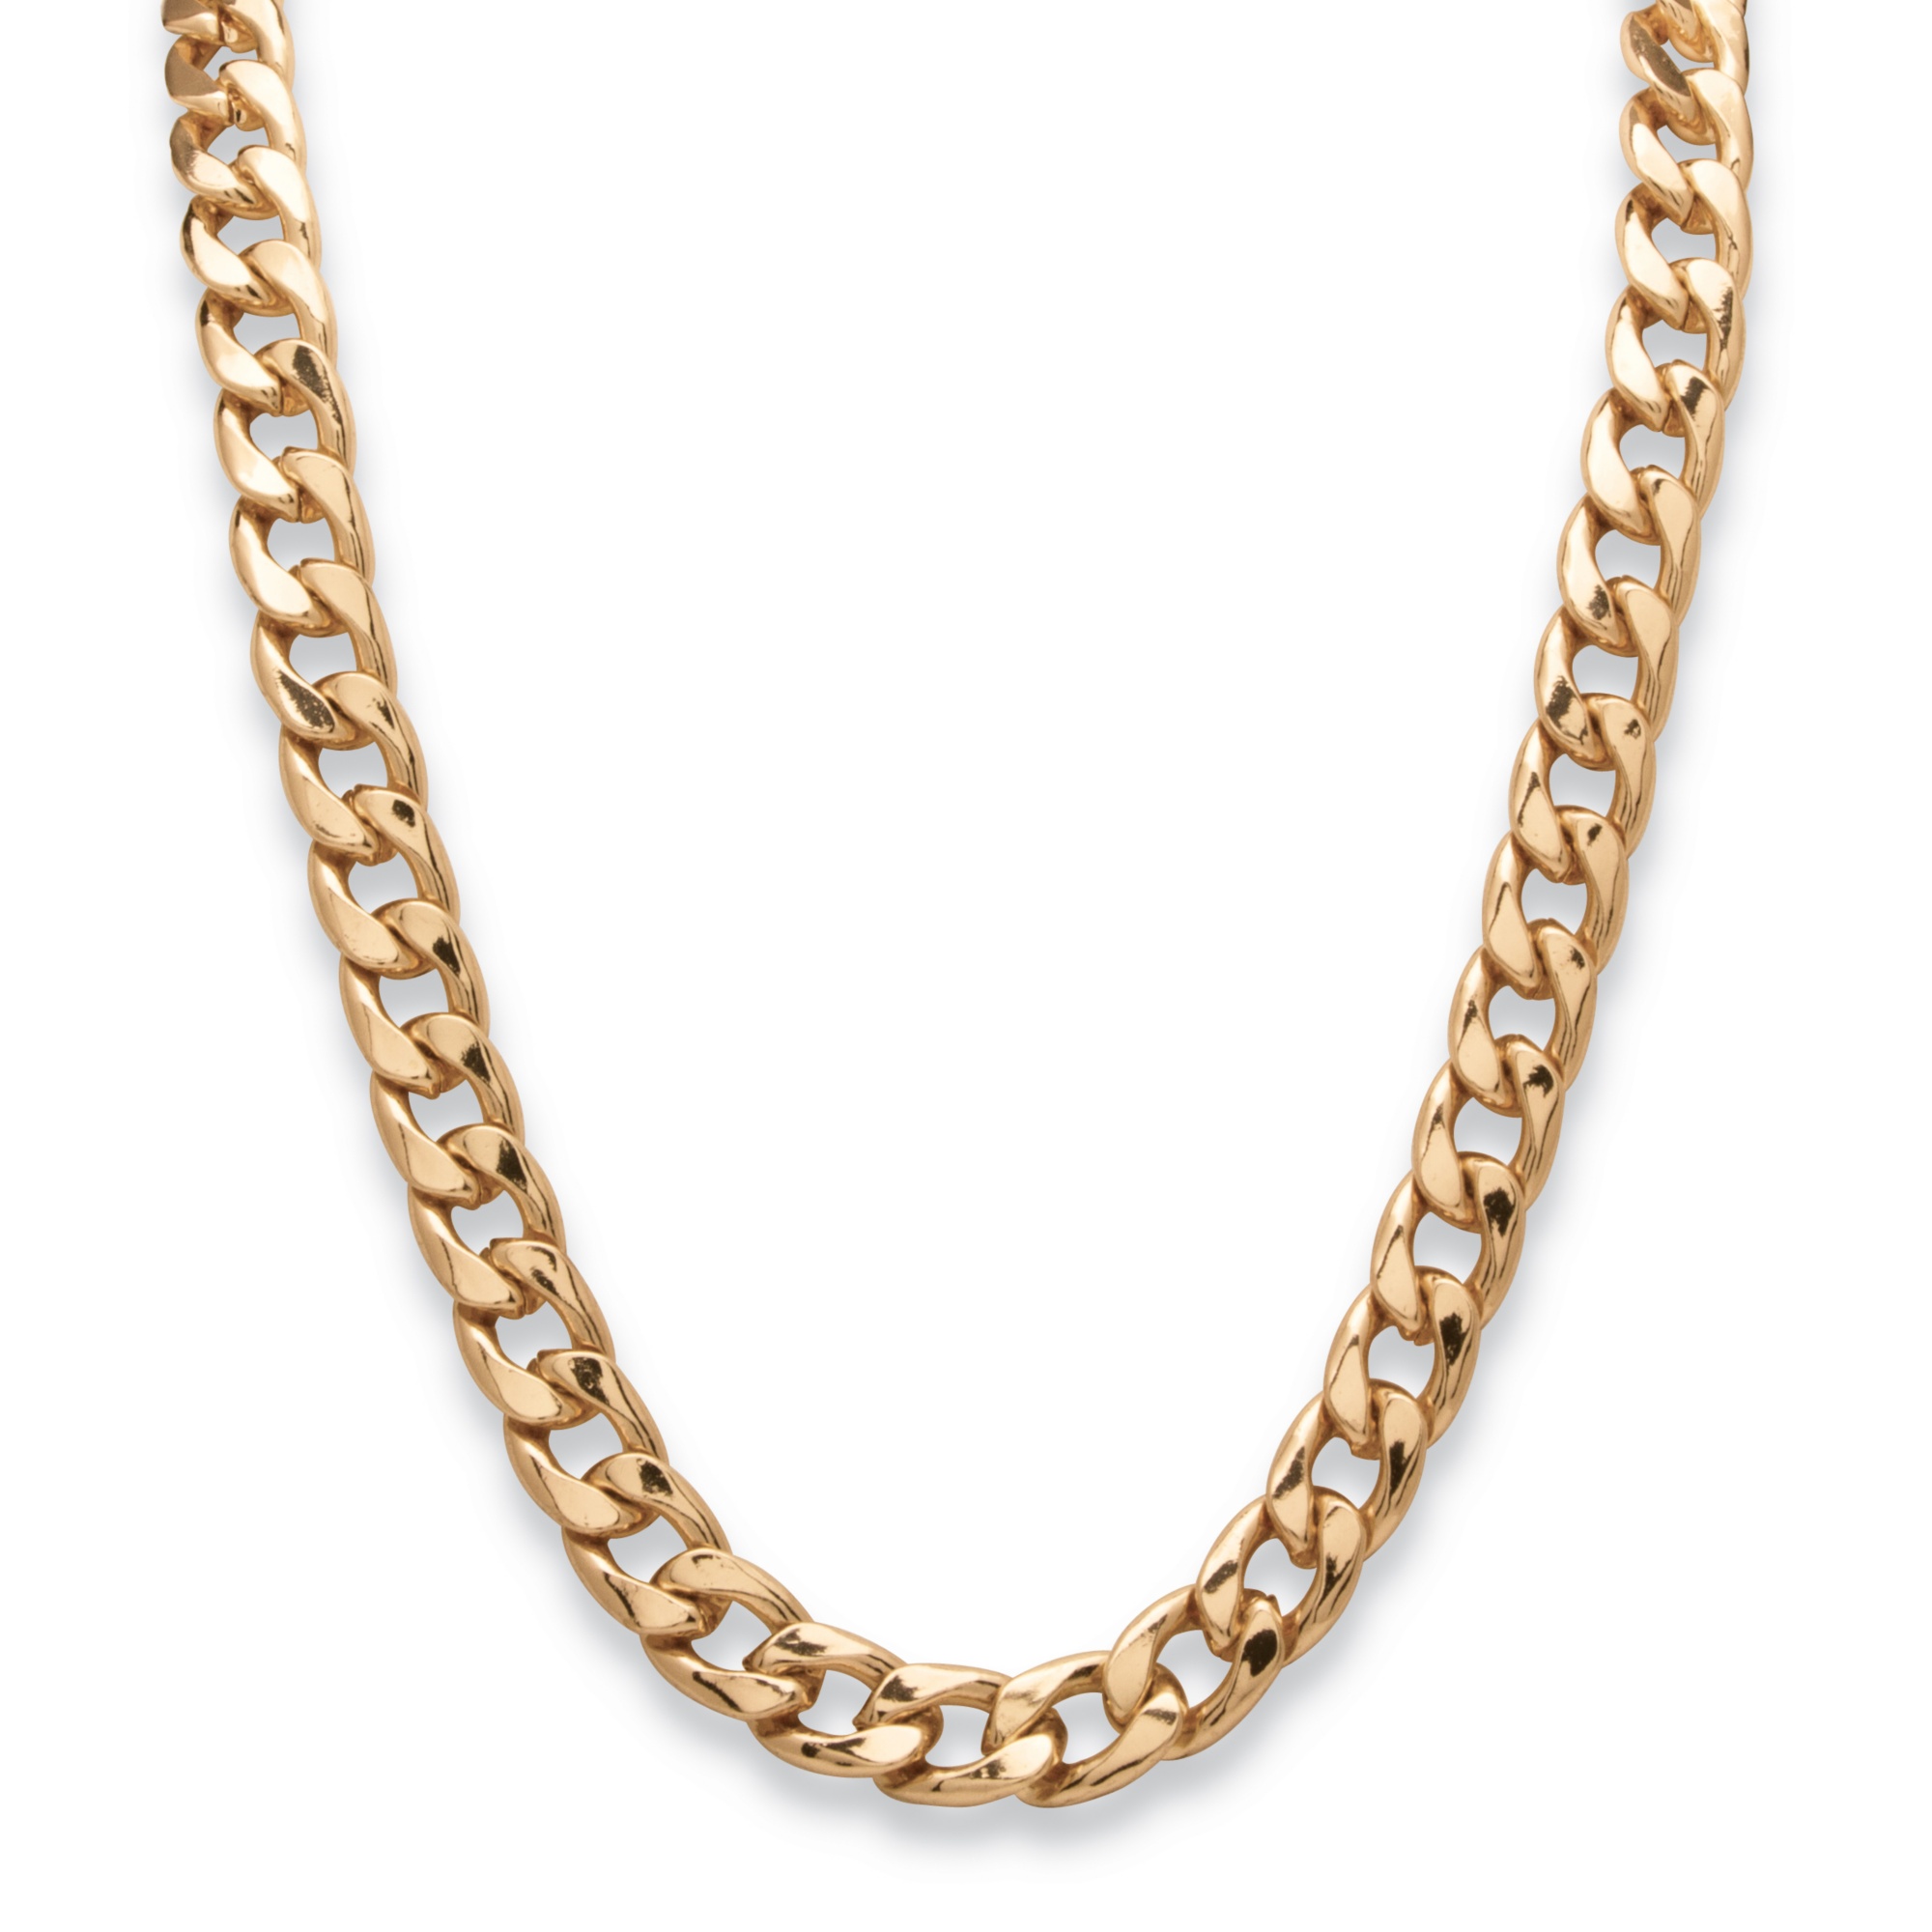 Men's Curb-Link Chain Necklace in Gold Tone 30